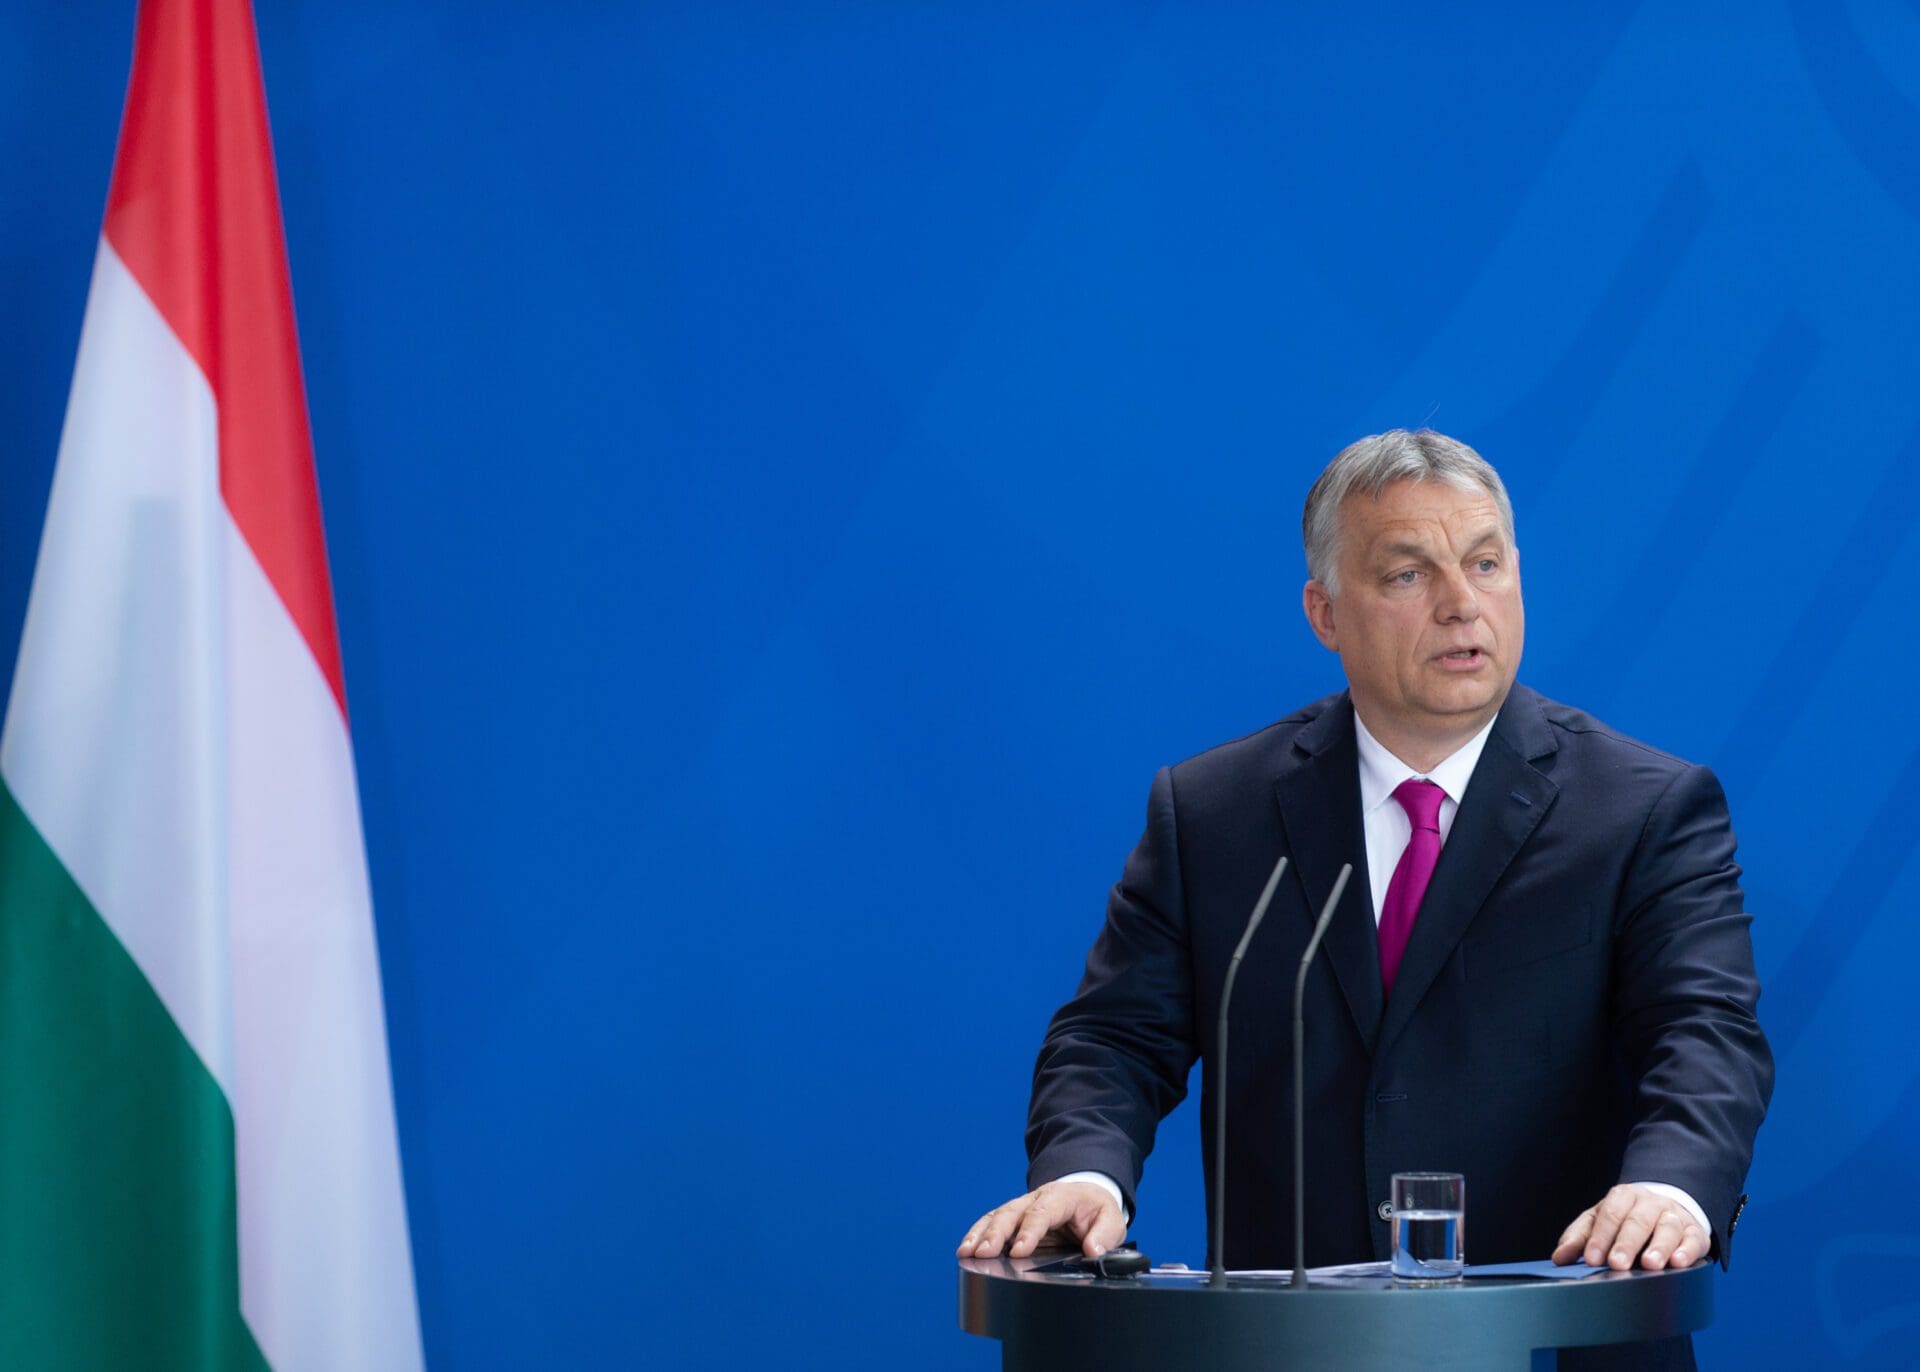 Ukraine Aid Row: Hungary Is Learning from the Best